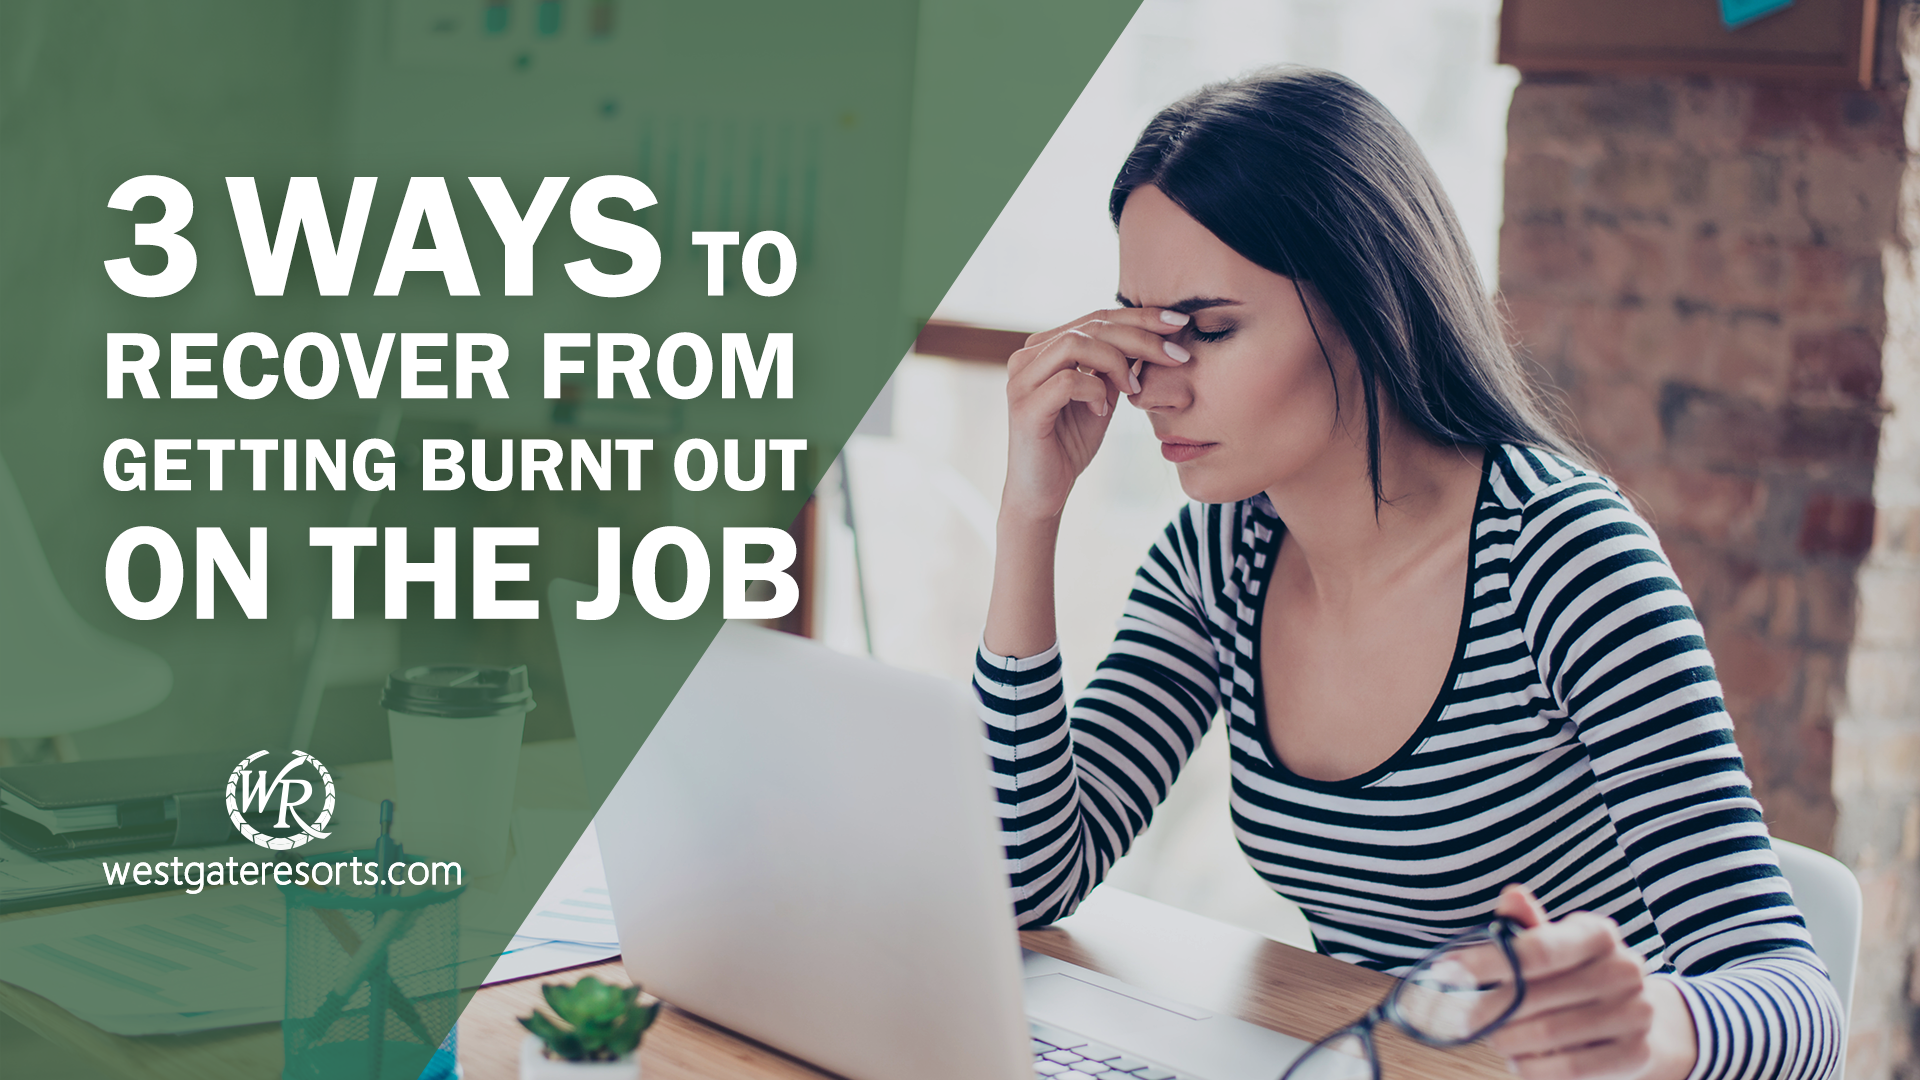 How to Handle Job Burnout | Three ways to recover from getting burnt out on the job | Signs of Job Burnout